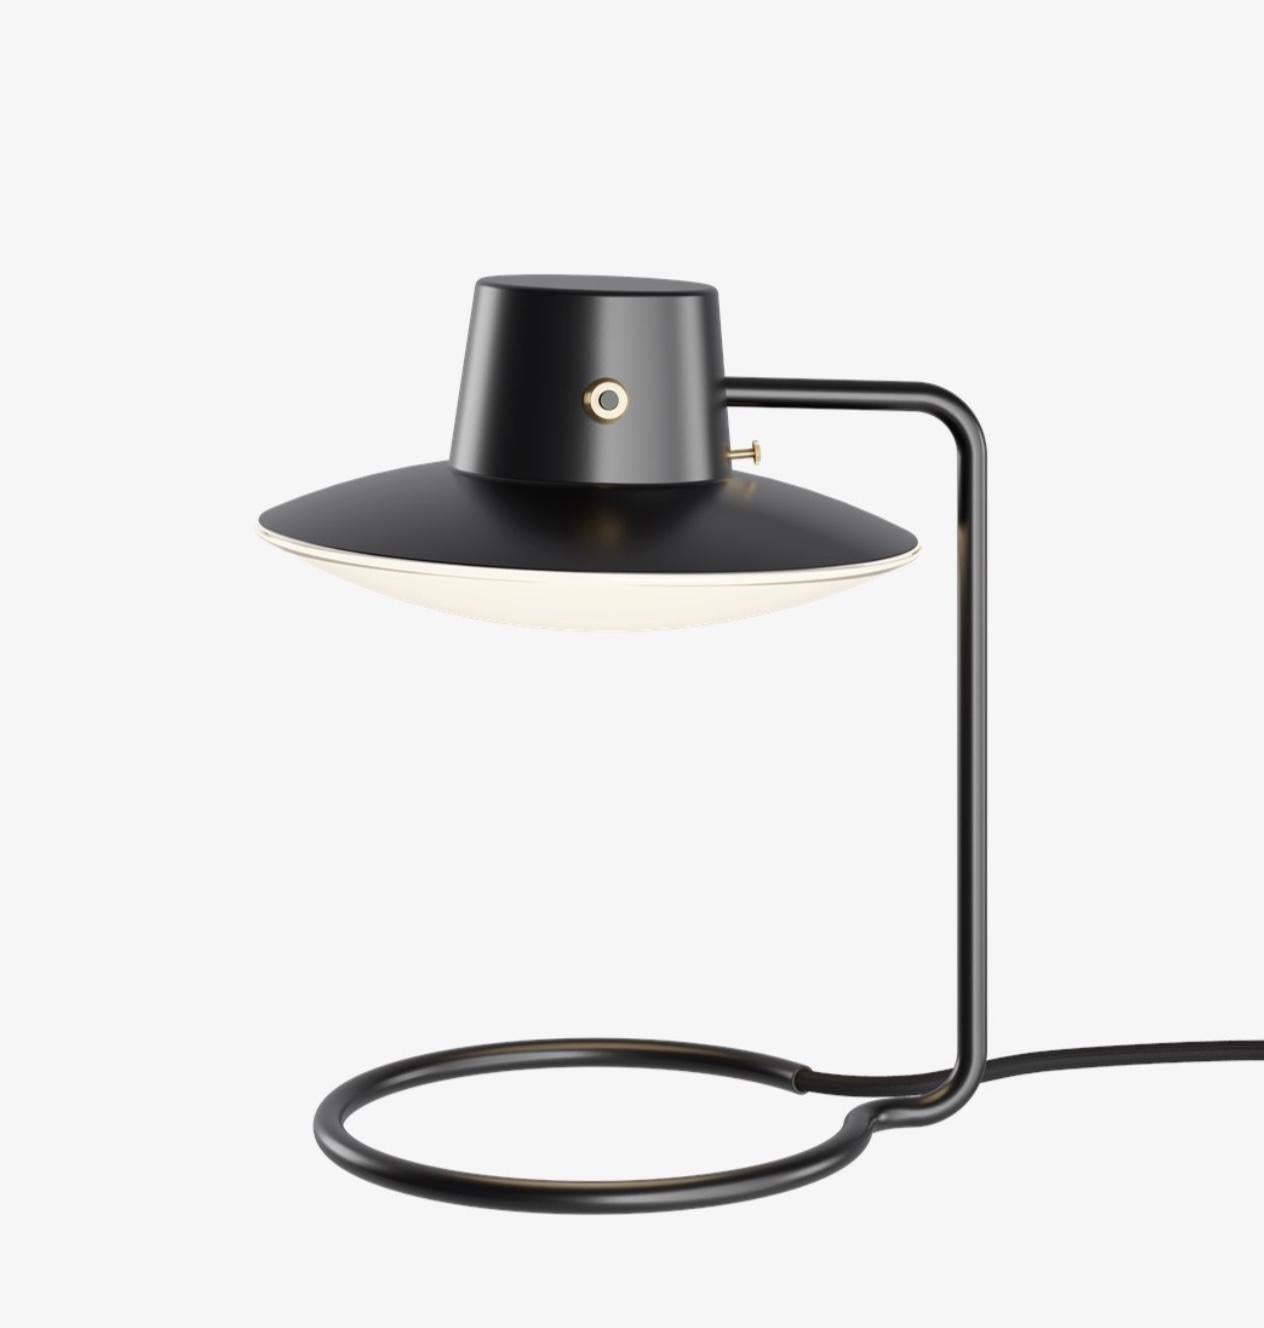 Arne Jacobsen AJ Oxford table lamp 28mm 410mm in black and opaline for Louis Poulsen. Designed in 1963, current production.

The AJ Oxford table lamp has a sleek graphic expression, which reflects the architecture of St Catherine's College, in